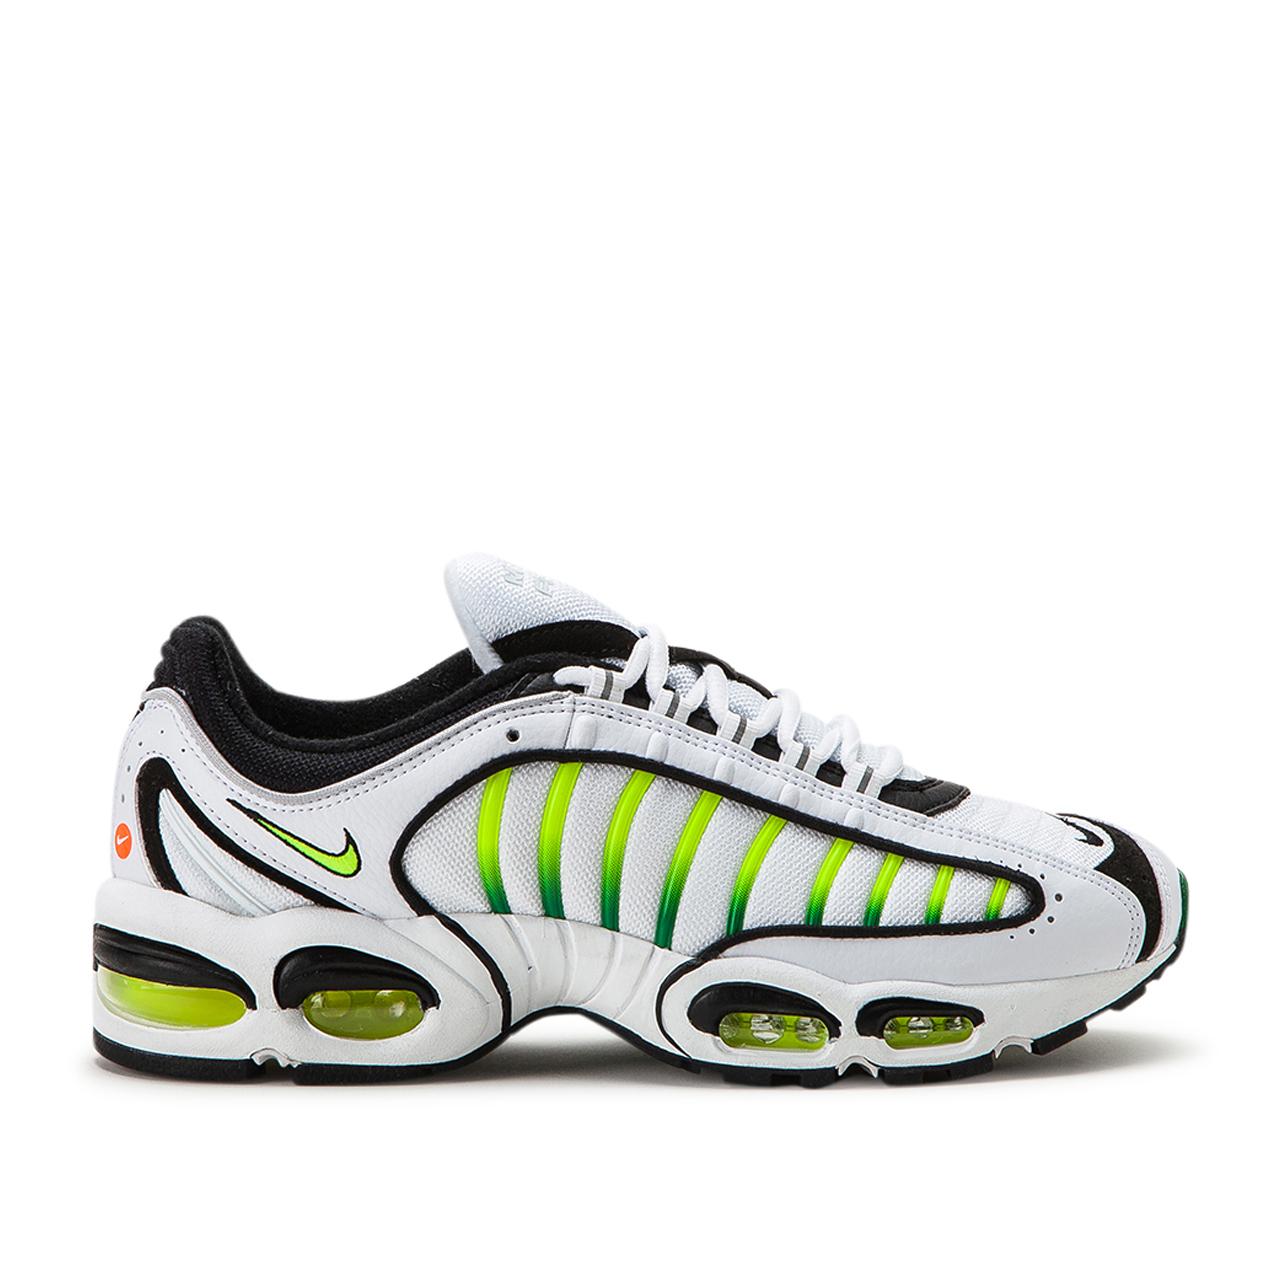 Nike Leather Air Max Tailwind Iv Shoe in White for Men - Lyst